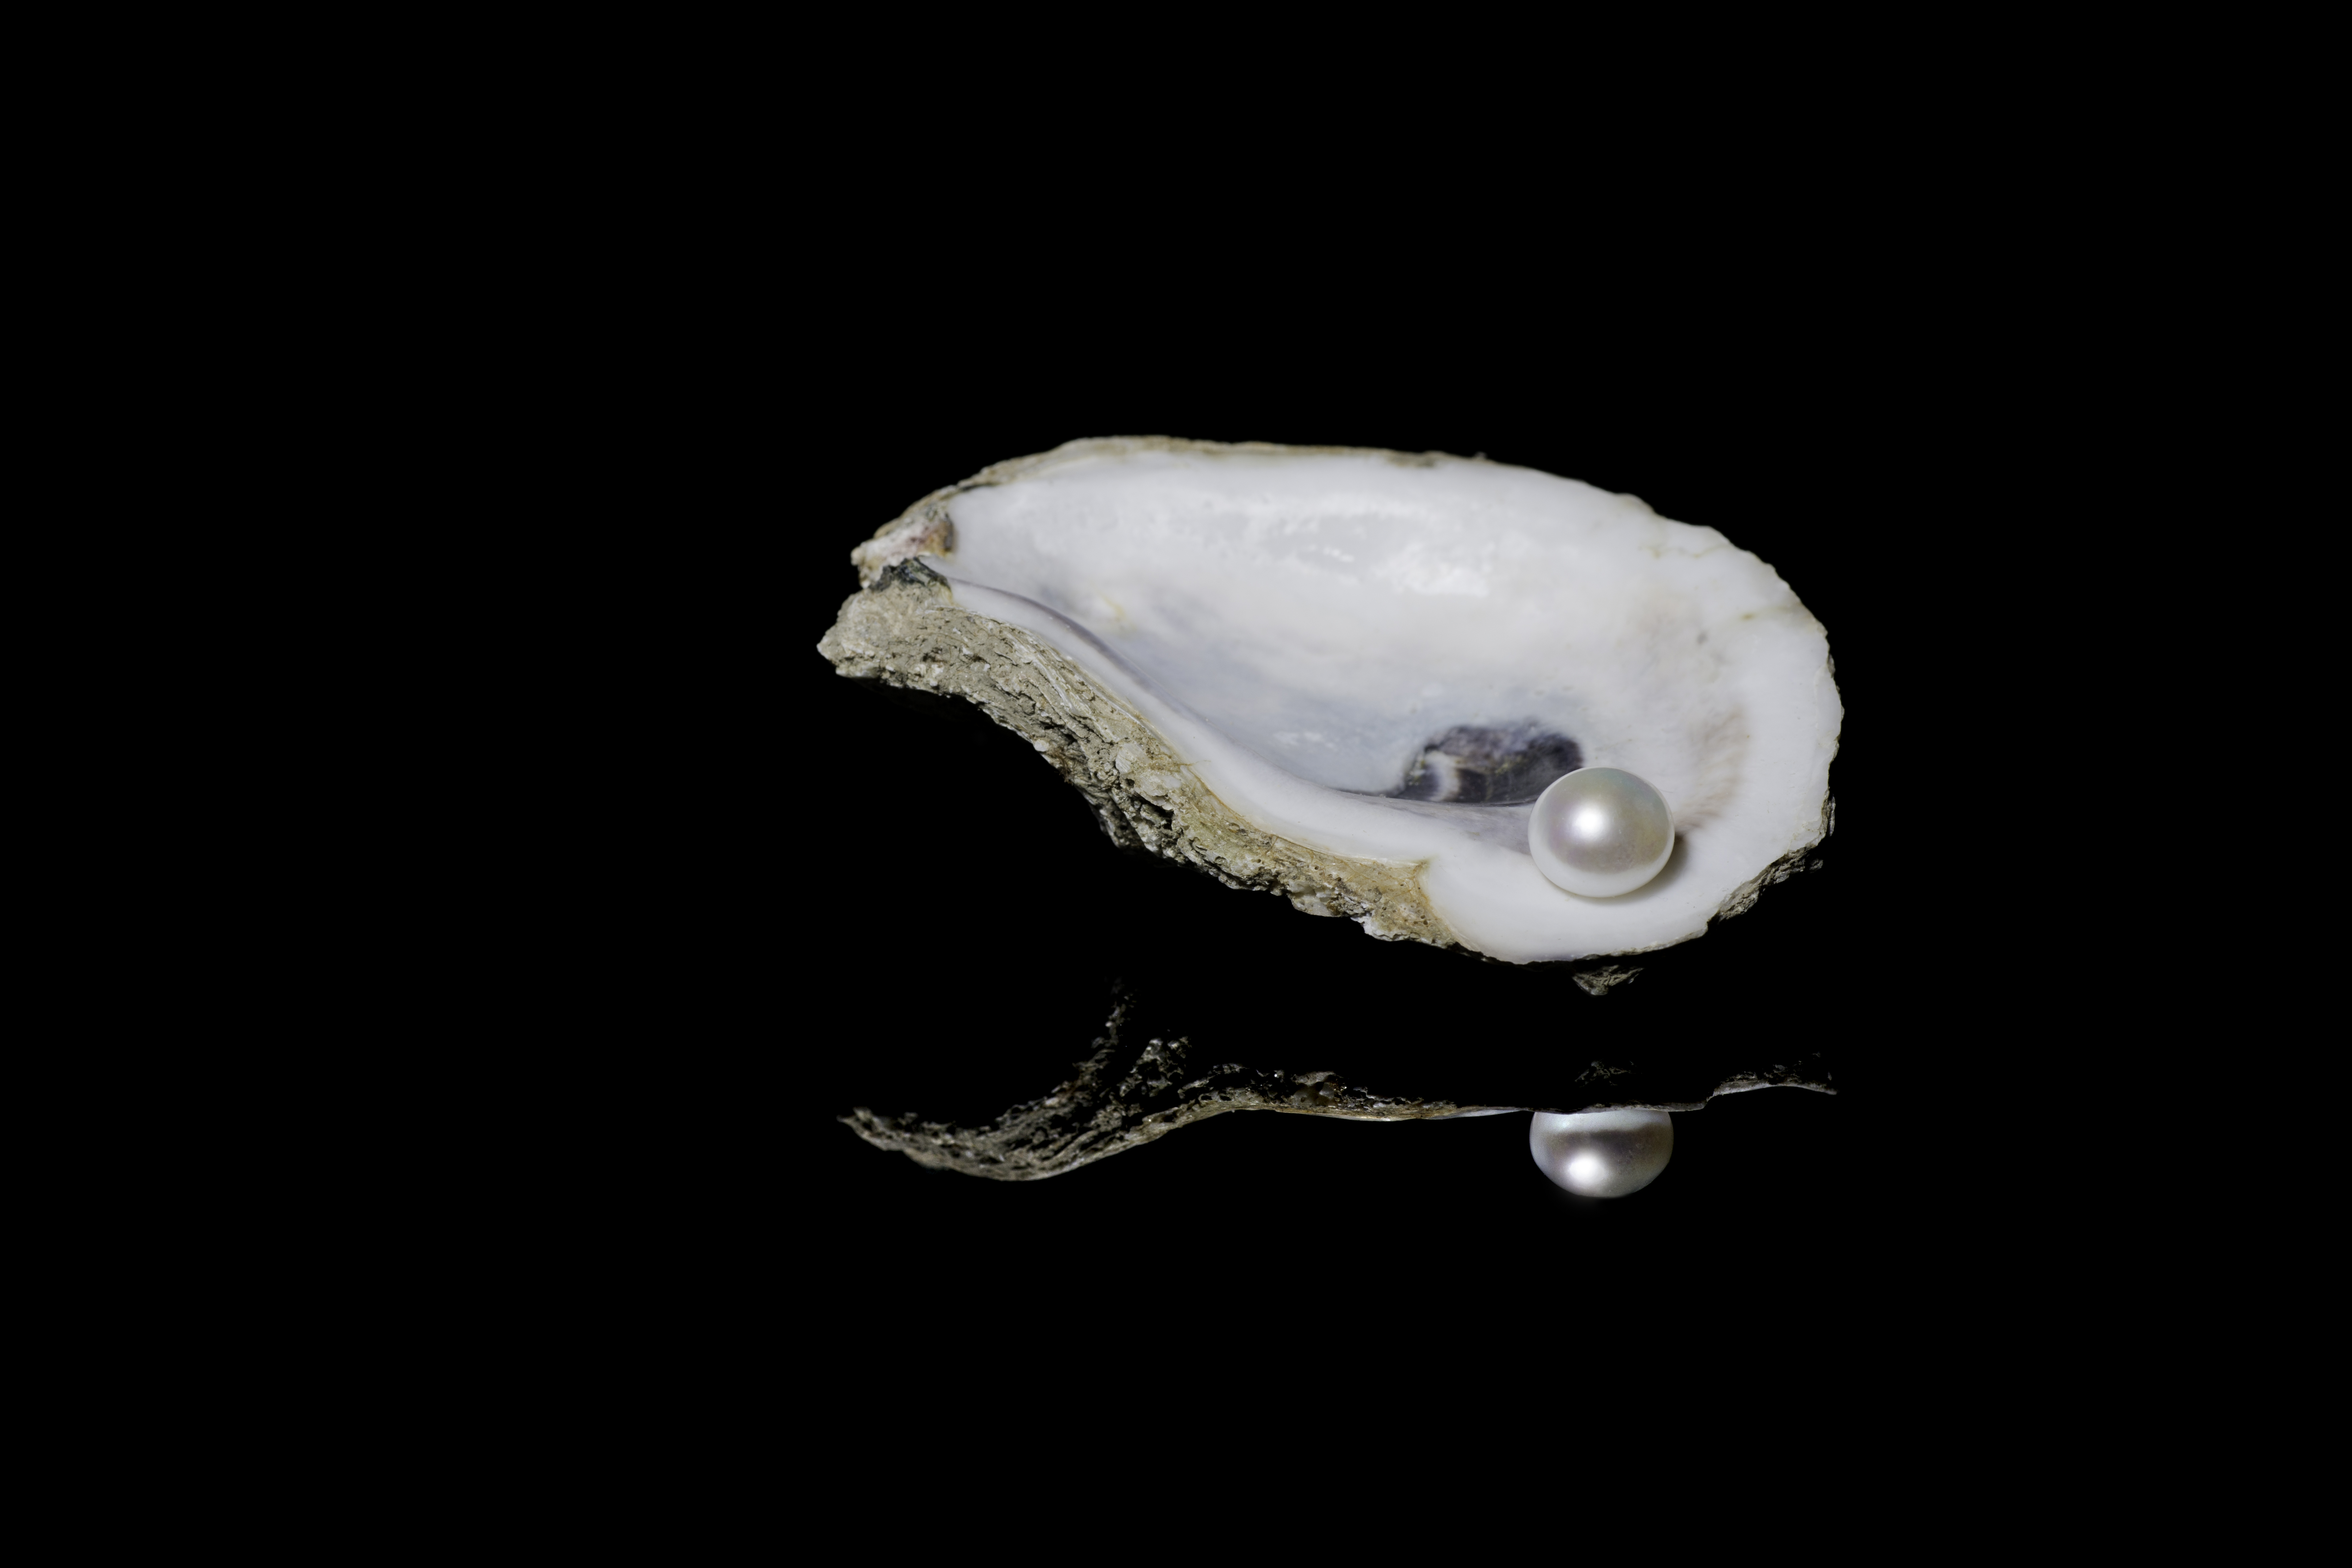 pearl oyster shell